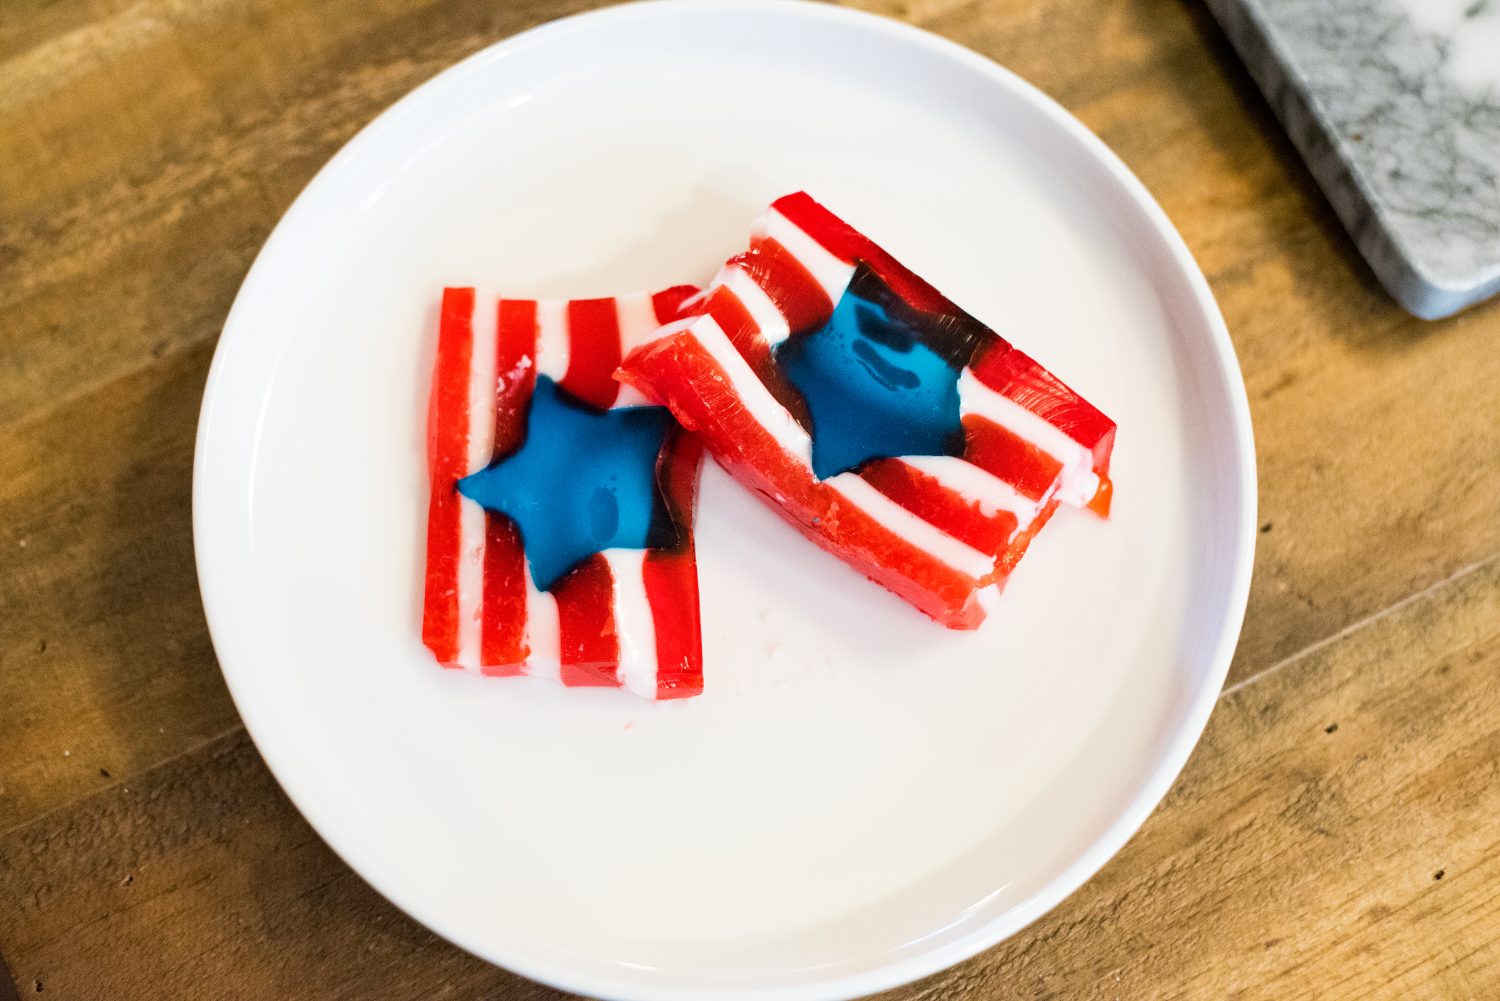 Miss USA 2011 Alyssa Campanella of The A List blog bakes Food Network's flag cake for Flag Cake Conquest